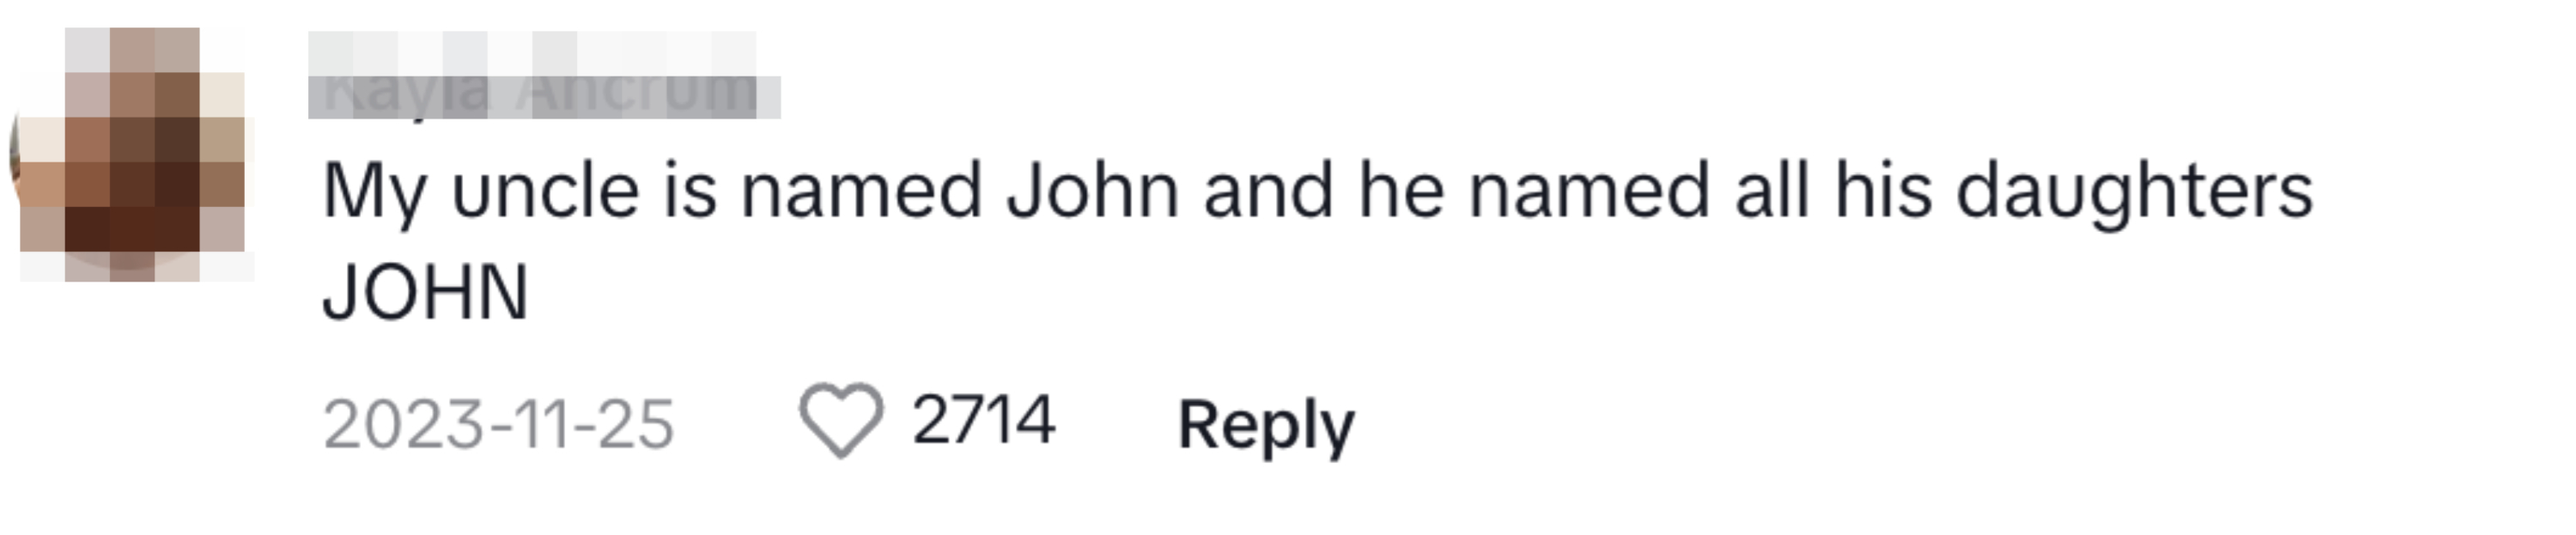 A commenter saying that their uncle named all his daughters John